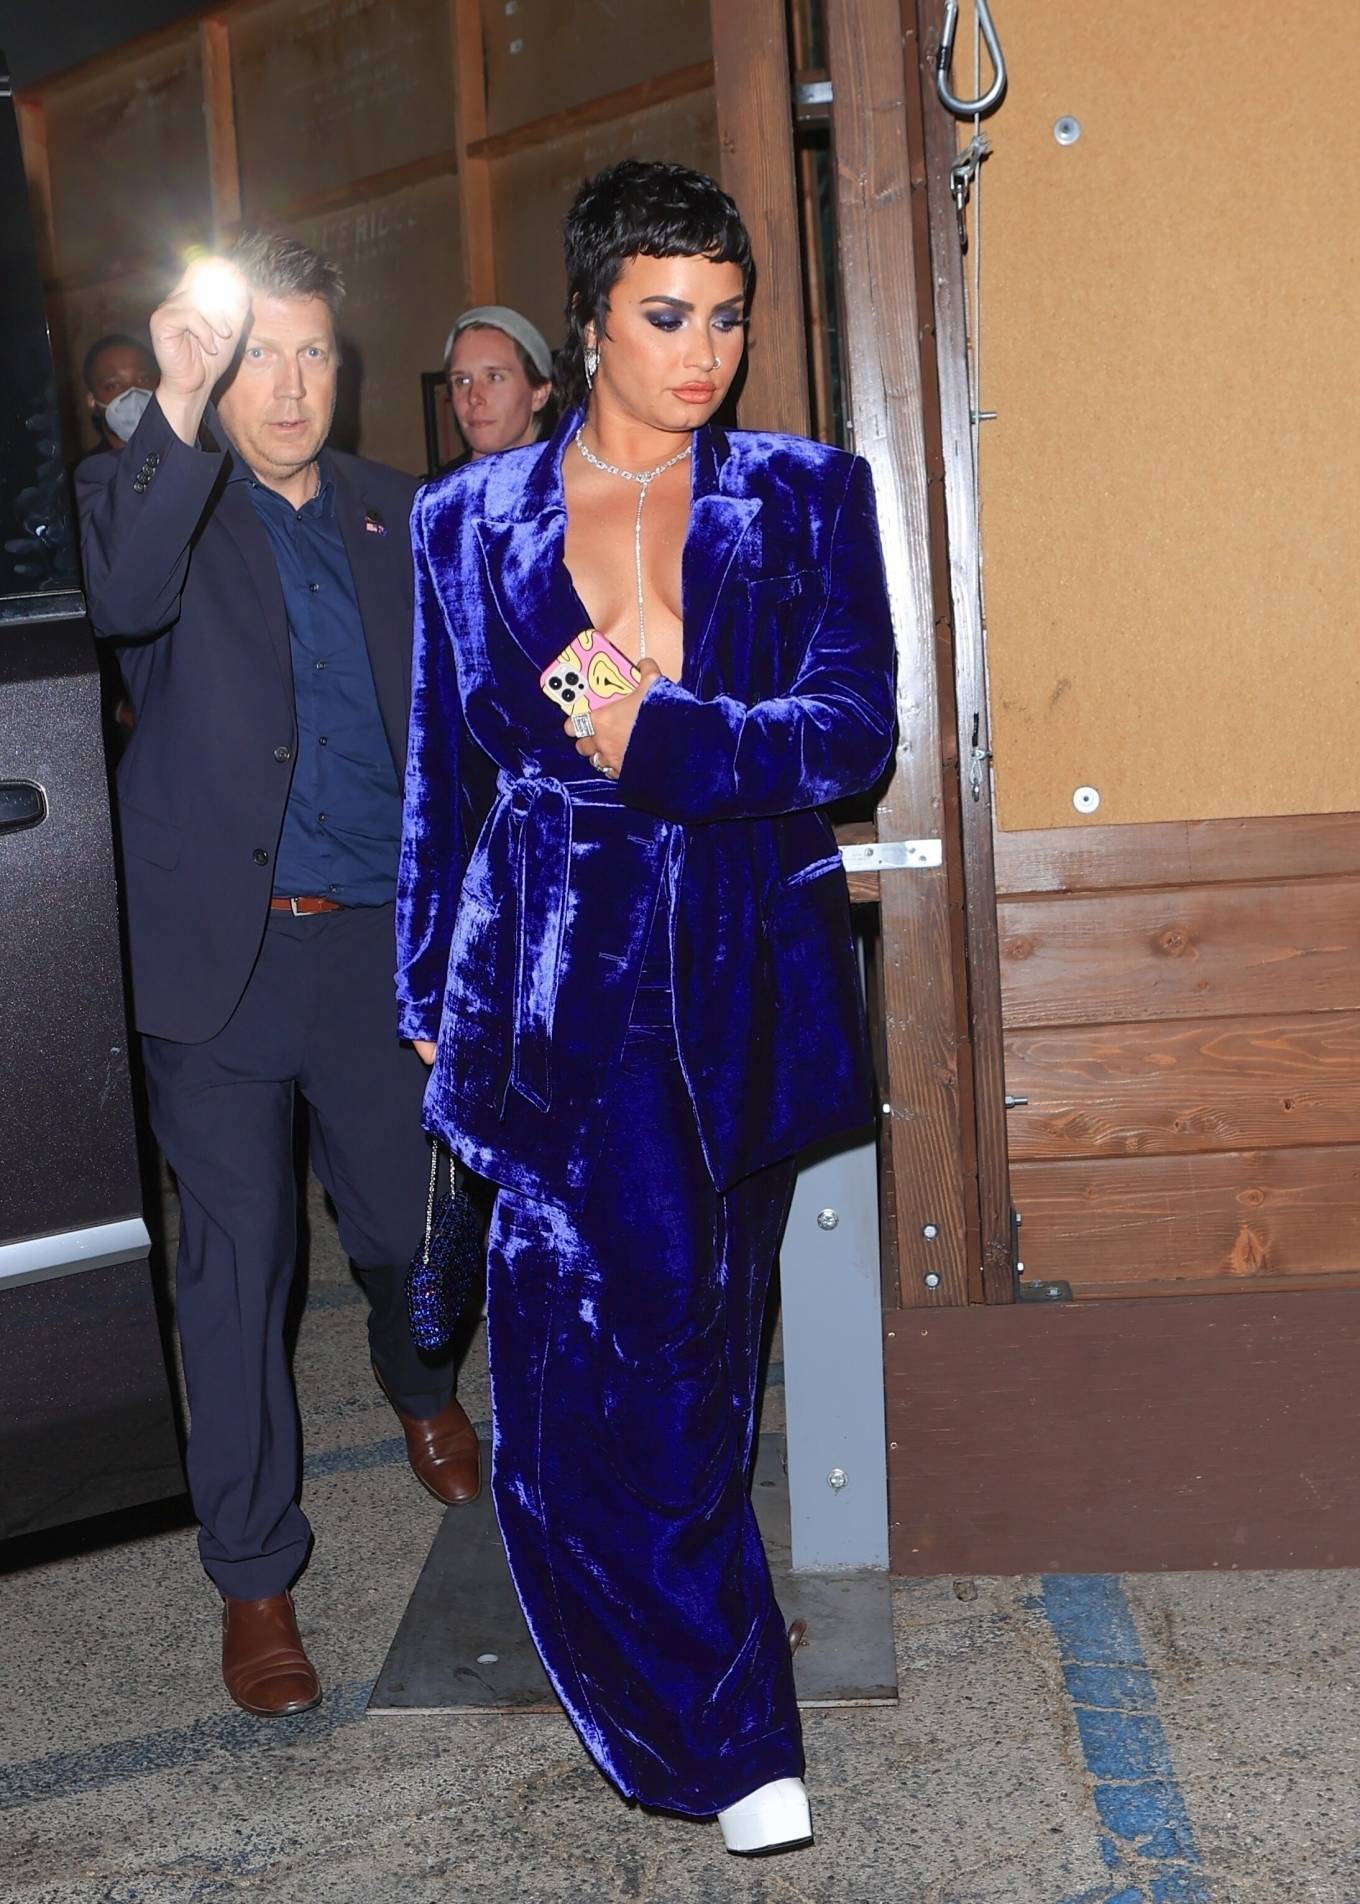 Demi Lovato 2021 : Demi Lovato – Seen in a blue dress leaving Craig’s in West Hollywood-02